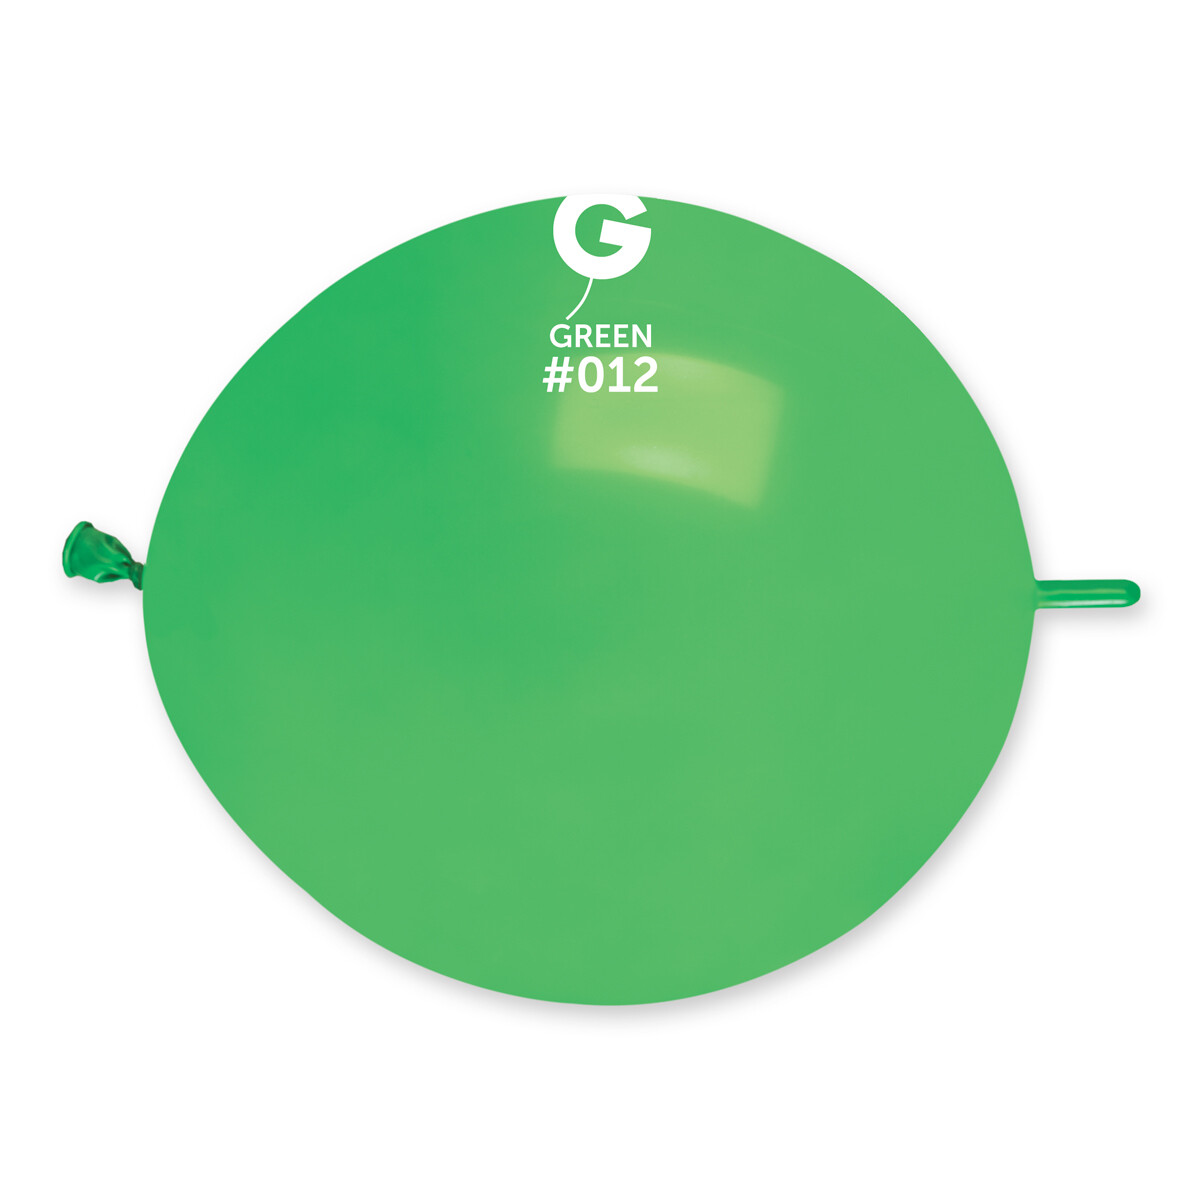 Standard Green #012 13in - 50 pieces